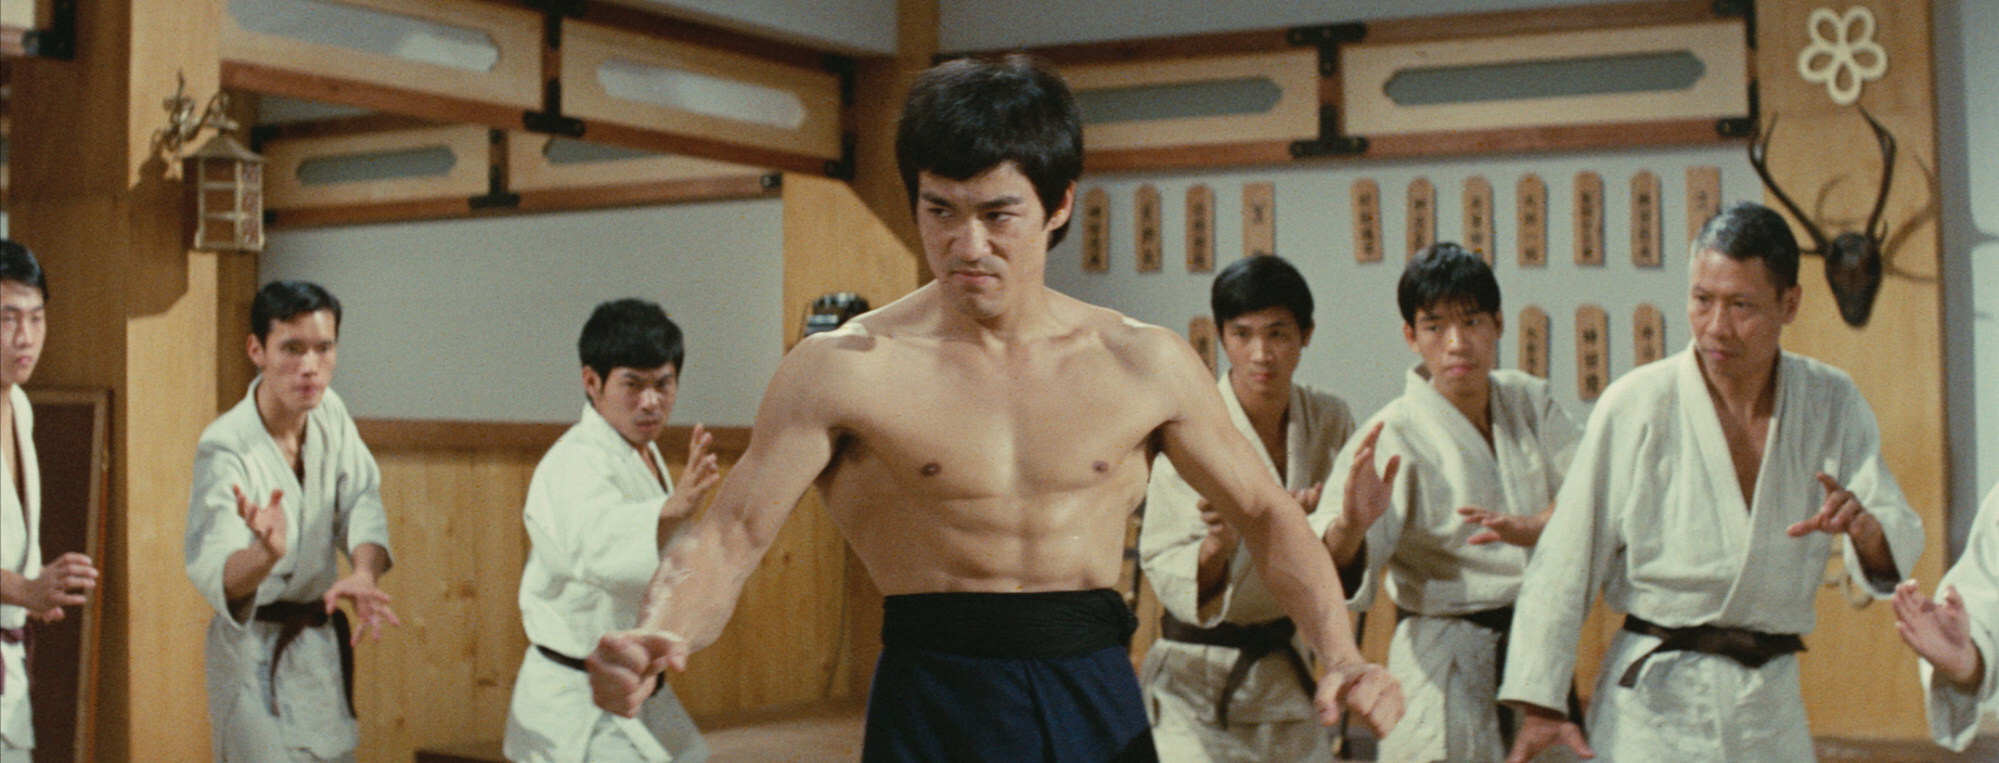 Before Bruce Lee Films Broke Out Of Chinatowns And Went Mainstream, America  Had Already Fallen In Love With Martial Arts Movies. When He Died, Their  Lustre Faded | South China Morning Post